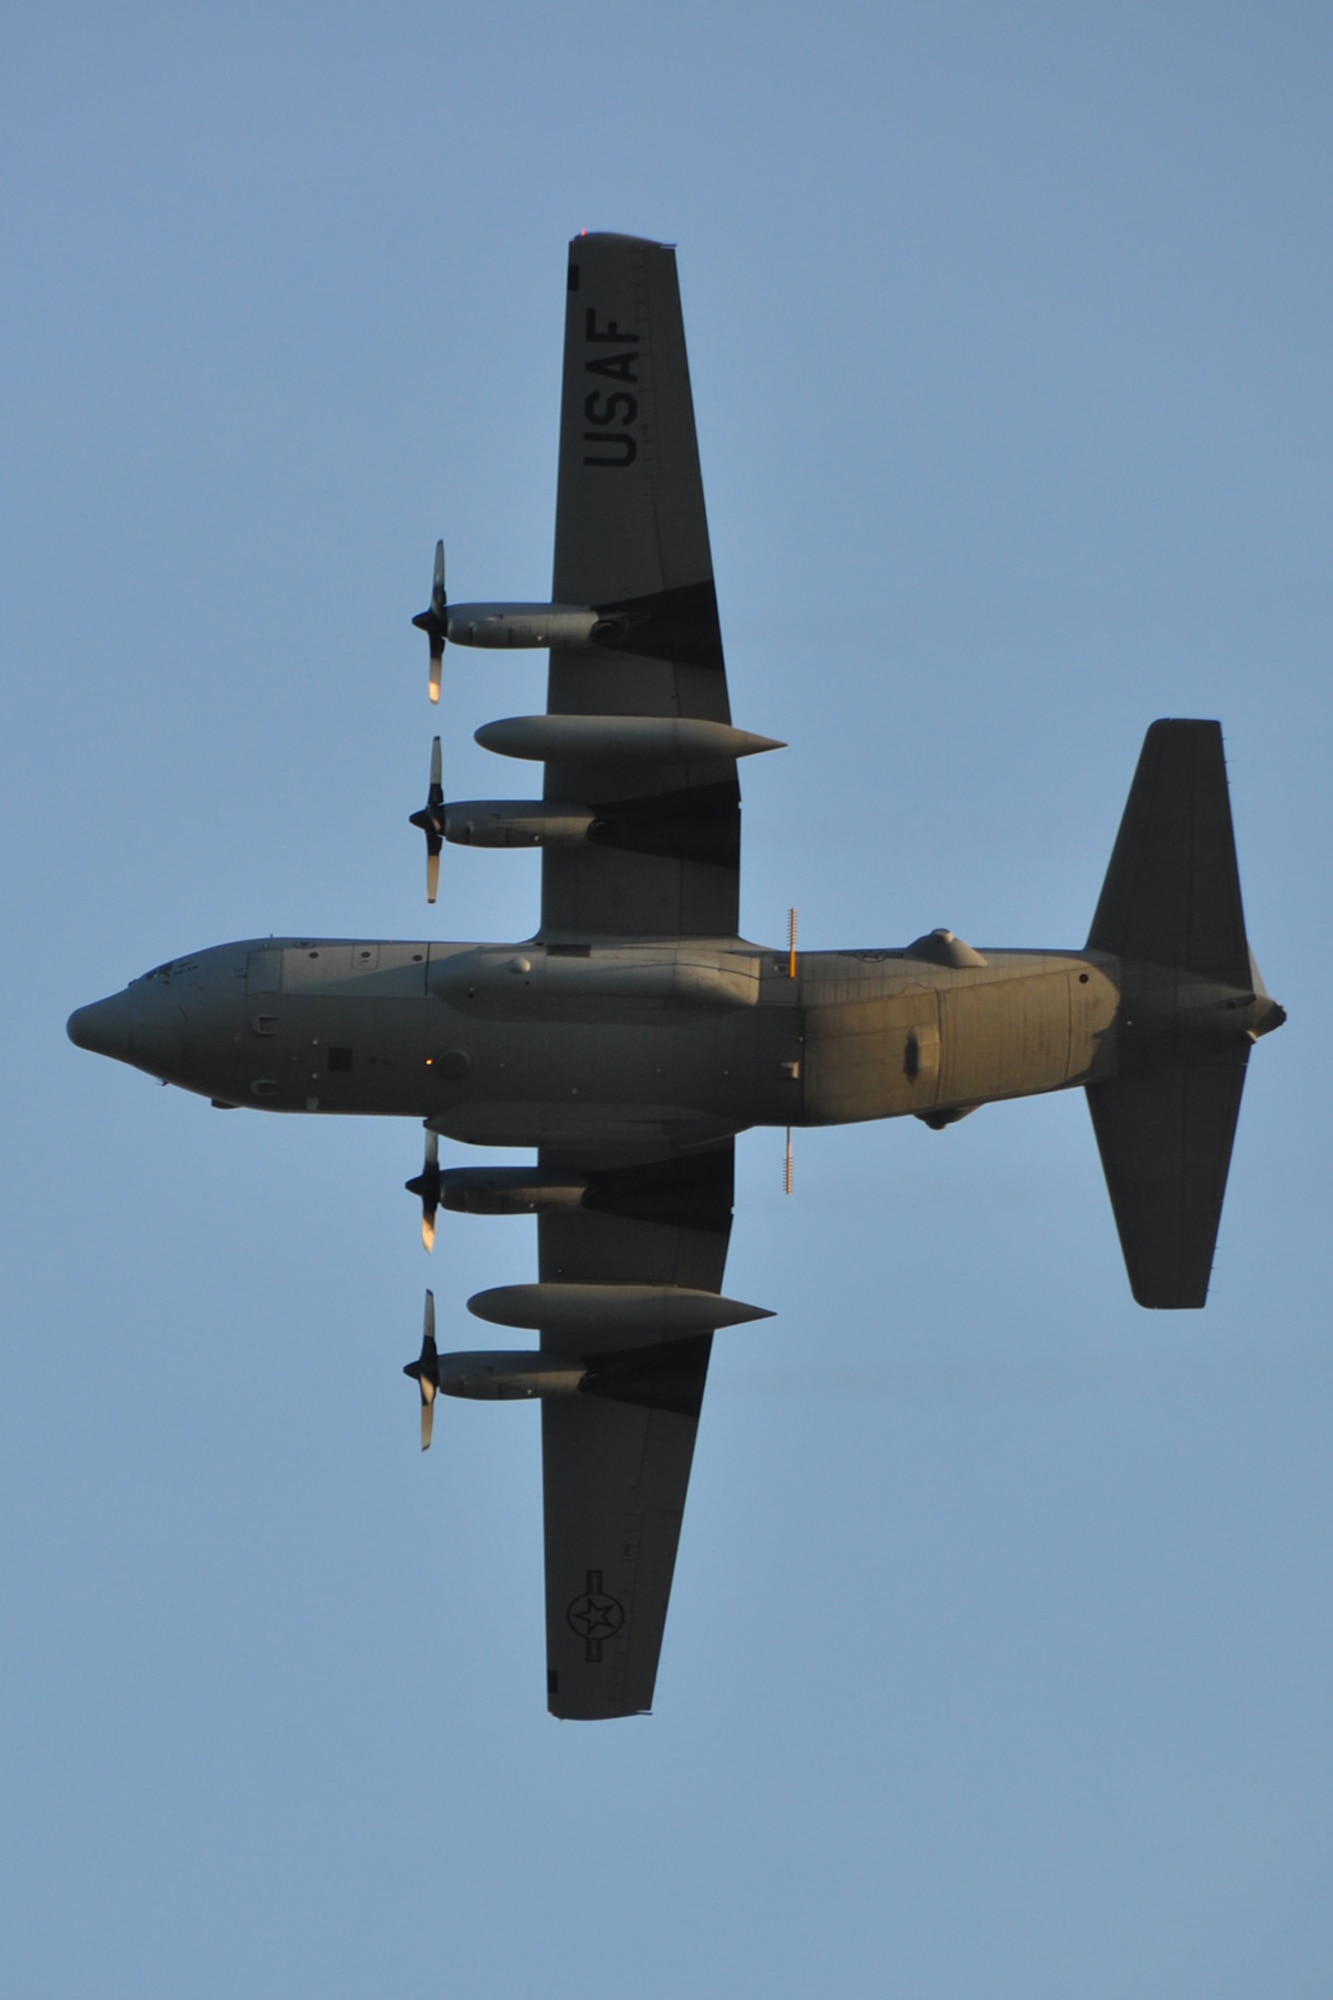 Joint Base Charleston – Weapons Station, S.C. – A specially-modified Air Force Reserve C-130 Hercules tactical cargo aircraft, assigned to the 910th Airlift Wing, based at Youngstown Air Reserve Station, Ohio, flies over an area known as the spoils site here, June 15, 2013. The 910th’s Aerial Spray Unit conducted spraying operations here, June 15, 2013 to control the population of the disease-carrying pest insects at the installation. The 910th’s 757th Airlift Squadron is home to the Department of Defense’s only large-area, fixed-wing aerial spray capability. U.S. Air Force photo by Master Sgt. Bob Barko Jr.